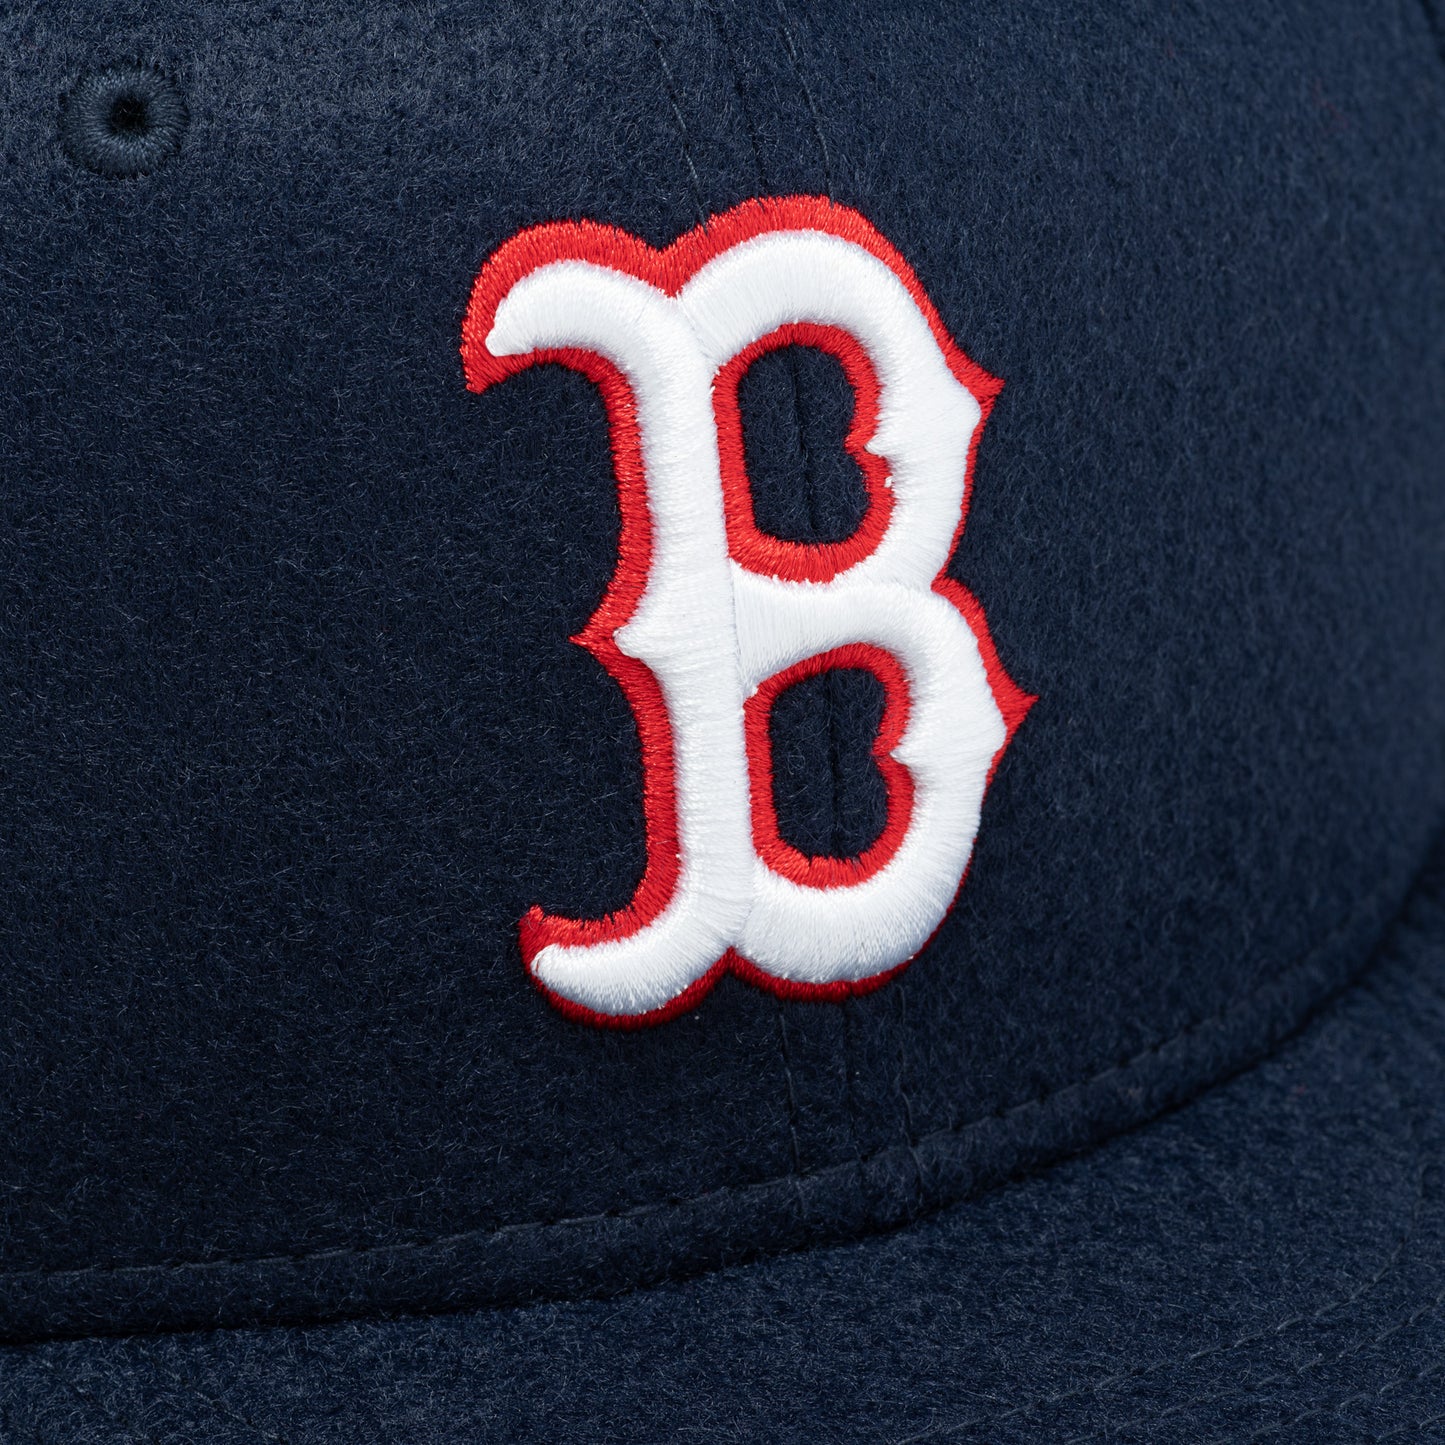 Concepts x New Era 59Fifty Boston Red Sox (Navy)